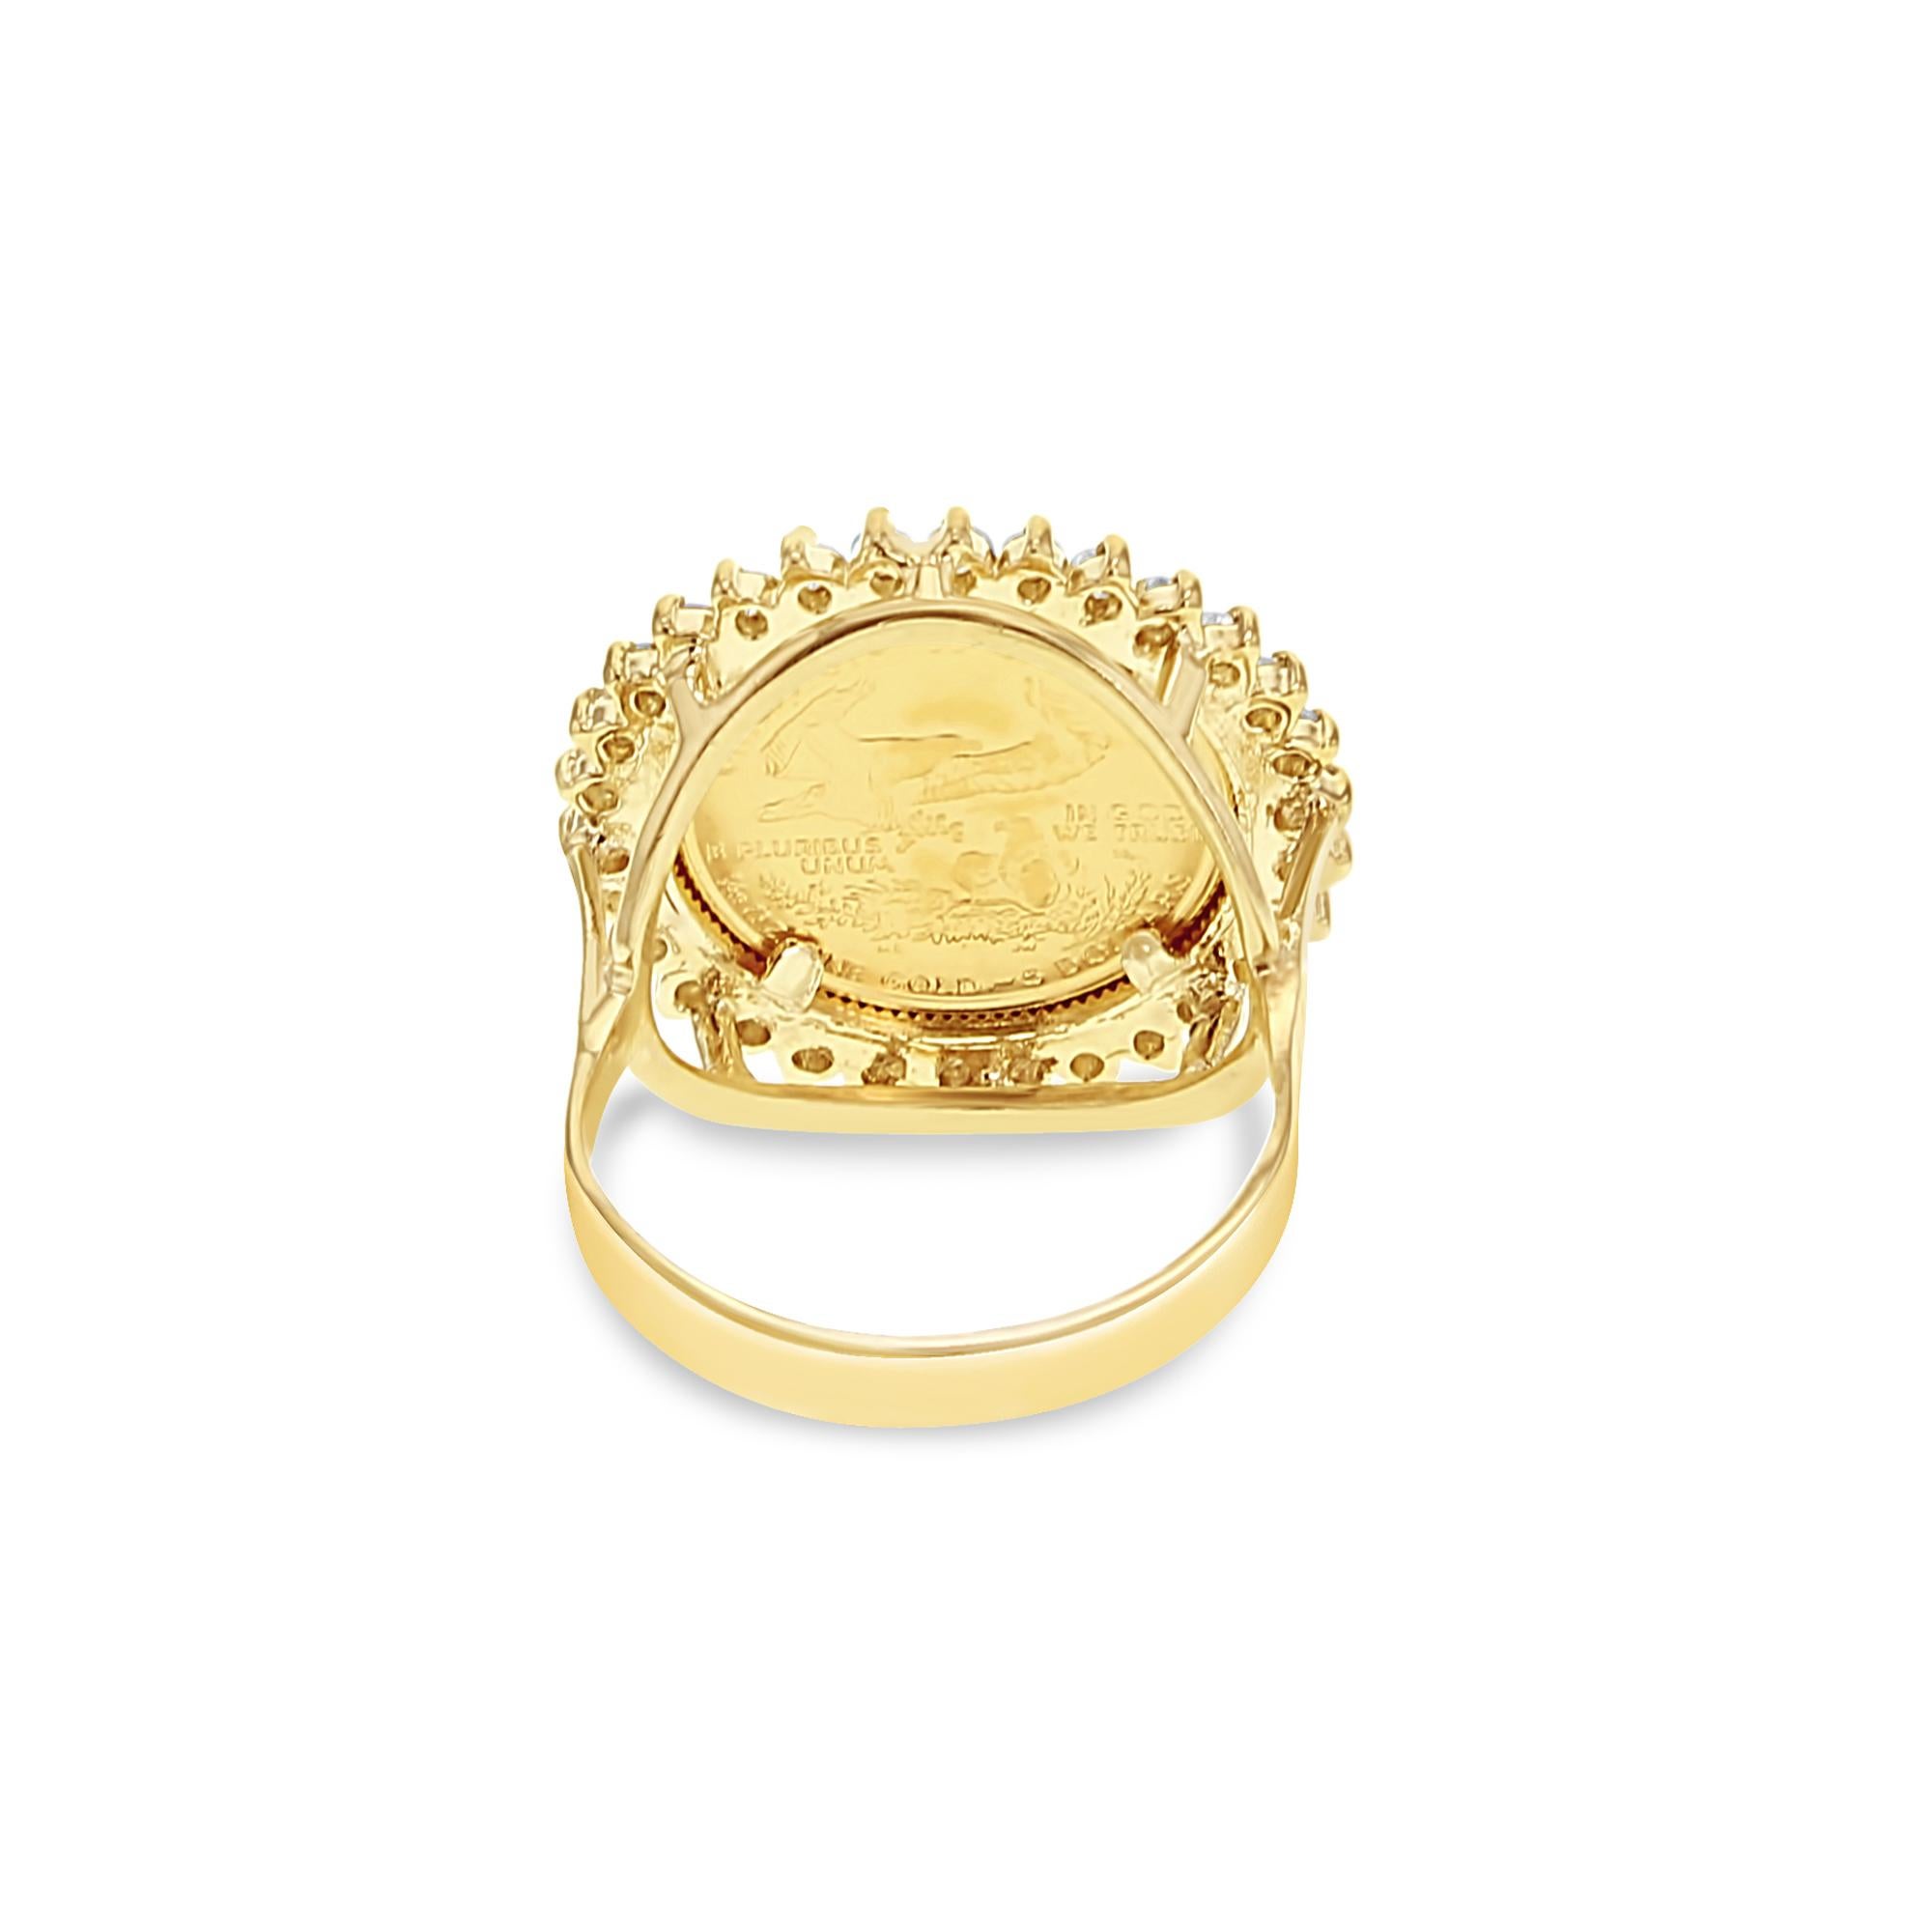 For Sale:  1/10OZ 22K Fine Gold Lady Liberty Coin Ring w/ Diamond Halo 14k Yellow Gold 3